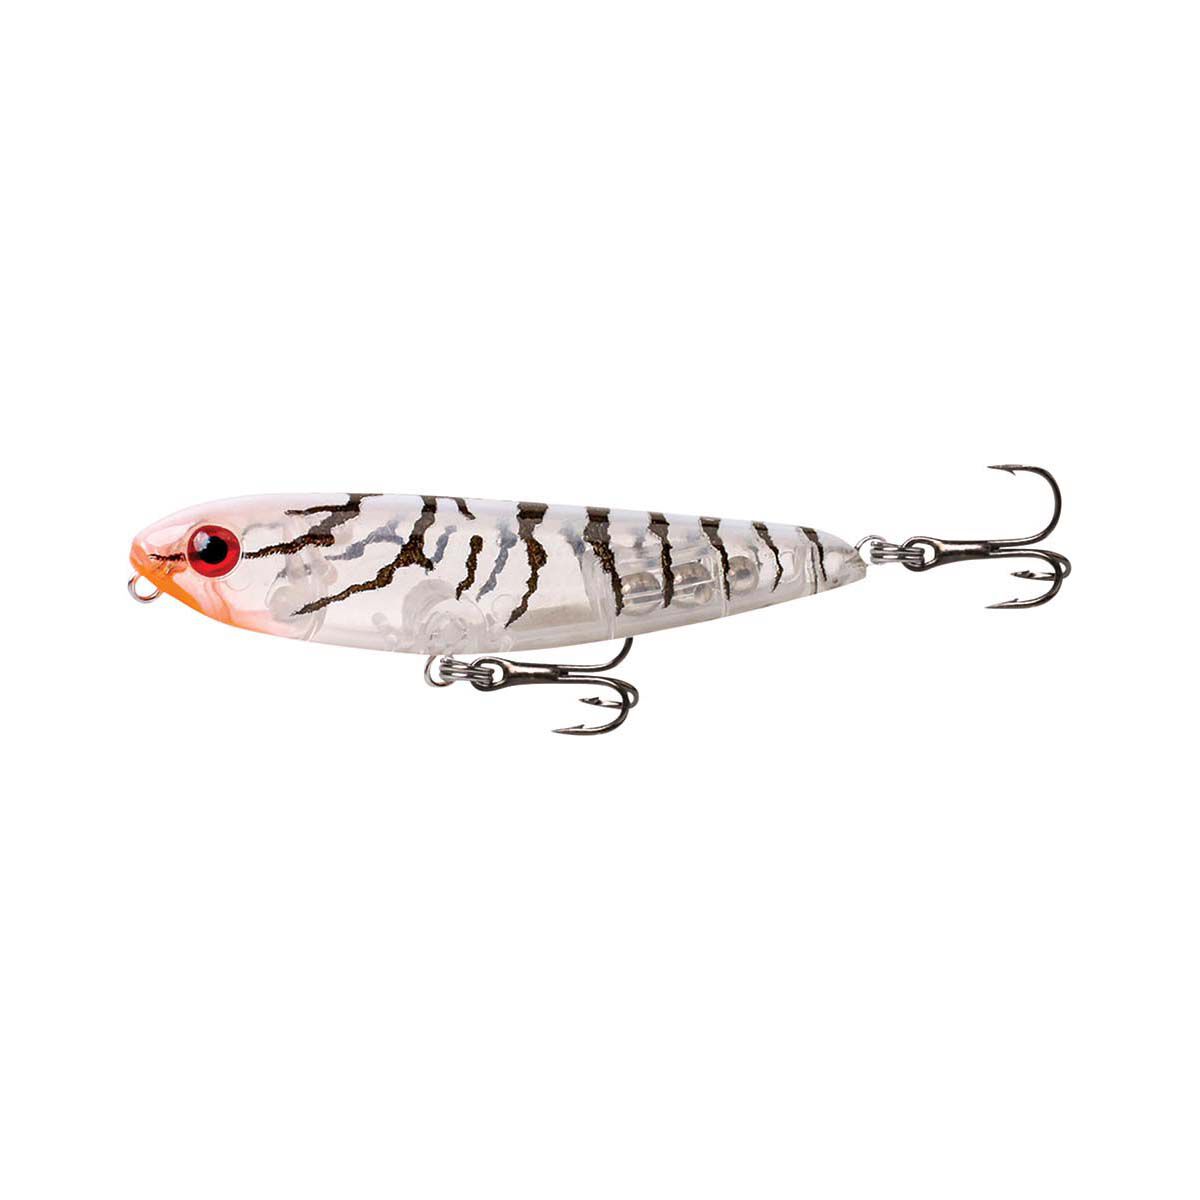 Fishcraft Snoop Dog Surface Lure 55mm Clear Tiger